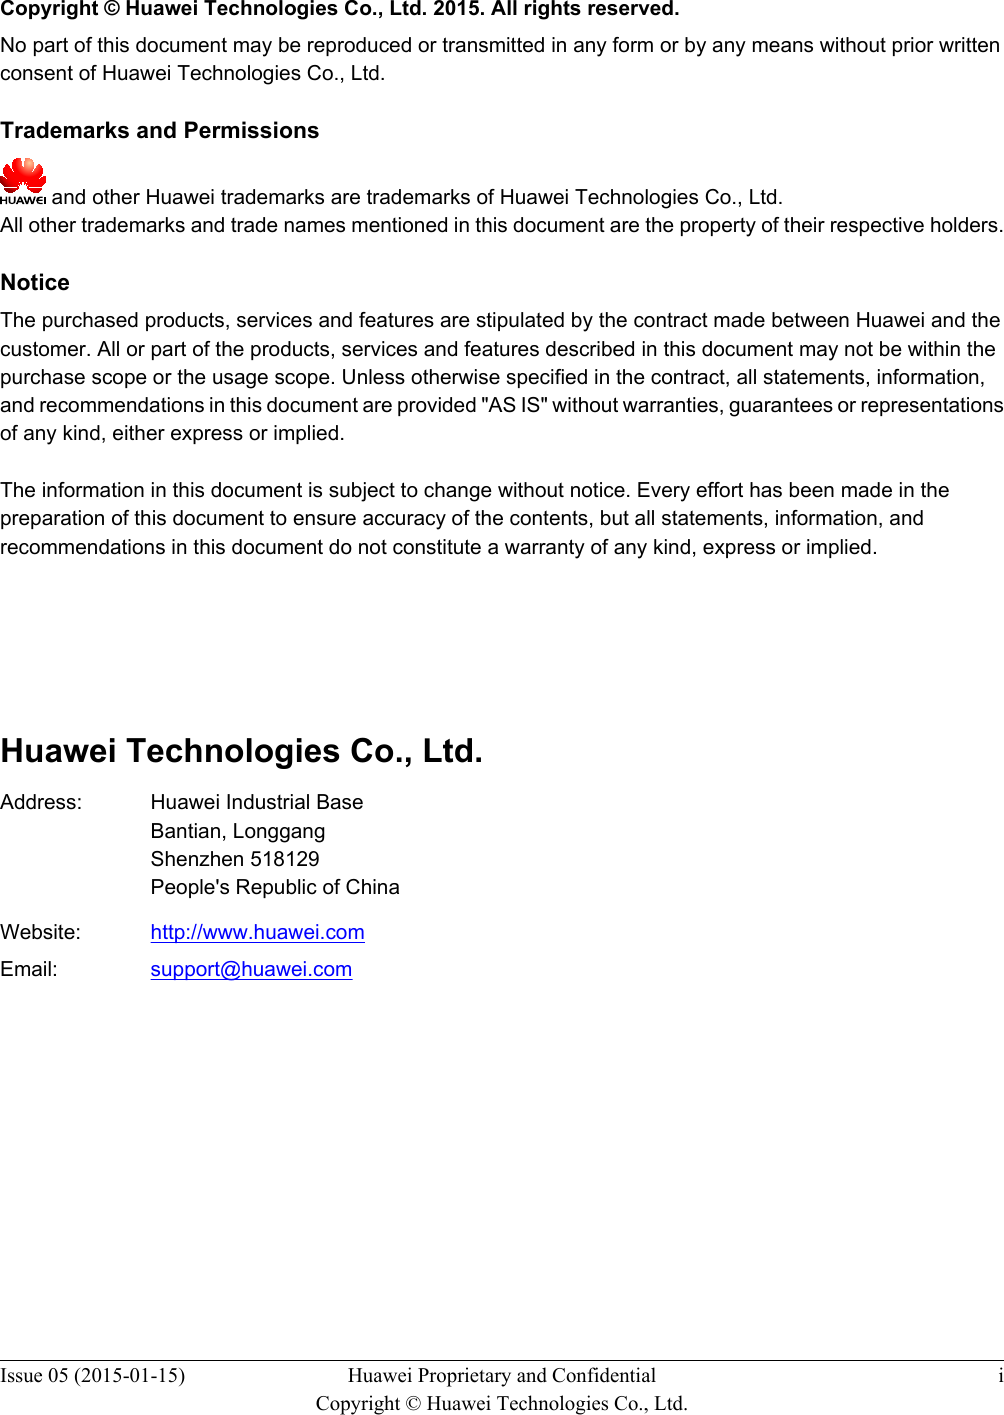   Copyright © Huawei Technologies Co., Ltd. 2015. All rights reserved.No part of this document may be reproduced or transmitted in any form or by any means without prior writtenconsent of Huawei Technologies Co., Ltd. Trademarks and Permissions and other Huawei trademarks are trademarks of Huawei Technologies Co., Ltd.All other trademarks and trade names mentioned in this document are the property of their respective holders. NoticeThe purchased products, services and features are stipulated by the contract made between Huawei and thecustomer. All or part of the products, services and features described in this document may not be within thepurchase scope or the usage scope. Unless otherwise specified in the contract, all statements, information,and recommendations in this document are provided &quot;AS IS&quot; without warranties, guarantees or representationsof any kind, either express or implied.The information in this document is subject to change without notice. Every effort has been made in thepreparation of this document to ensure accuracy of the contents, but all statements, information, andrecommendations in this document do not constitute a warranty of any kind, express or implied.       Huawei Technologies Co., Ltd.Address: Huawei Industrial BaseBantian, LonggangShenzhen 518129People&apos;s Republic of ChinaWebsite: http://www.huawei.comEmail: support@huawei.comIssue 05 (2015-01-15) Huawei Proprietary and ConfidentialCopyright © Huawei Technologies Co., Ltd.i